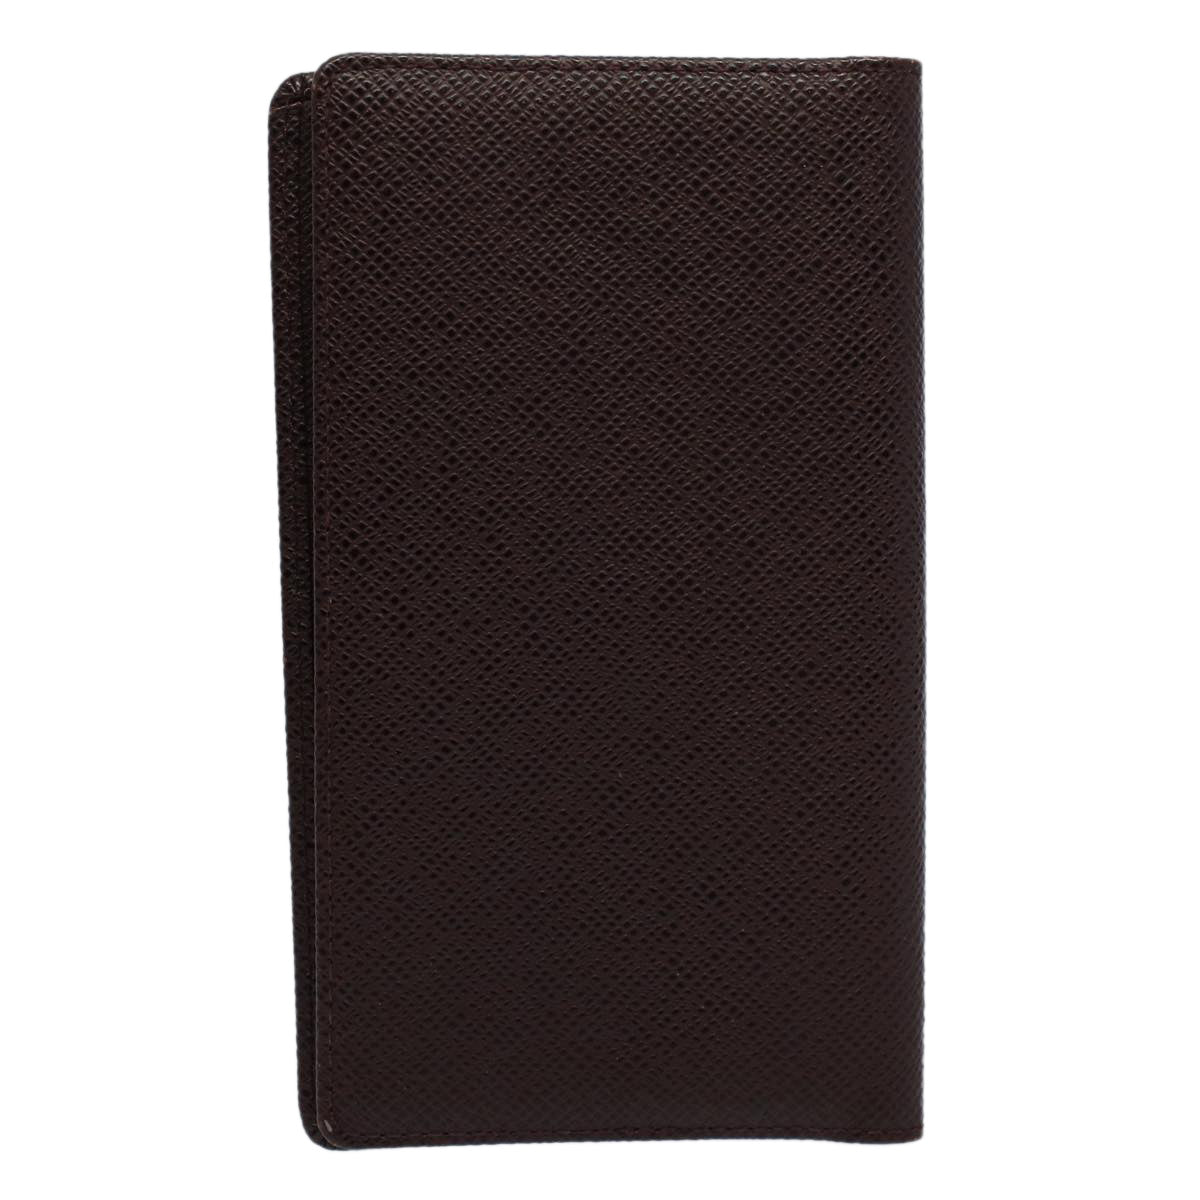 LOUIS VUITTON Taiga Leather Agenda Poche Note Cover Grizzly R20430 Auth bs9455 - 0